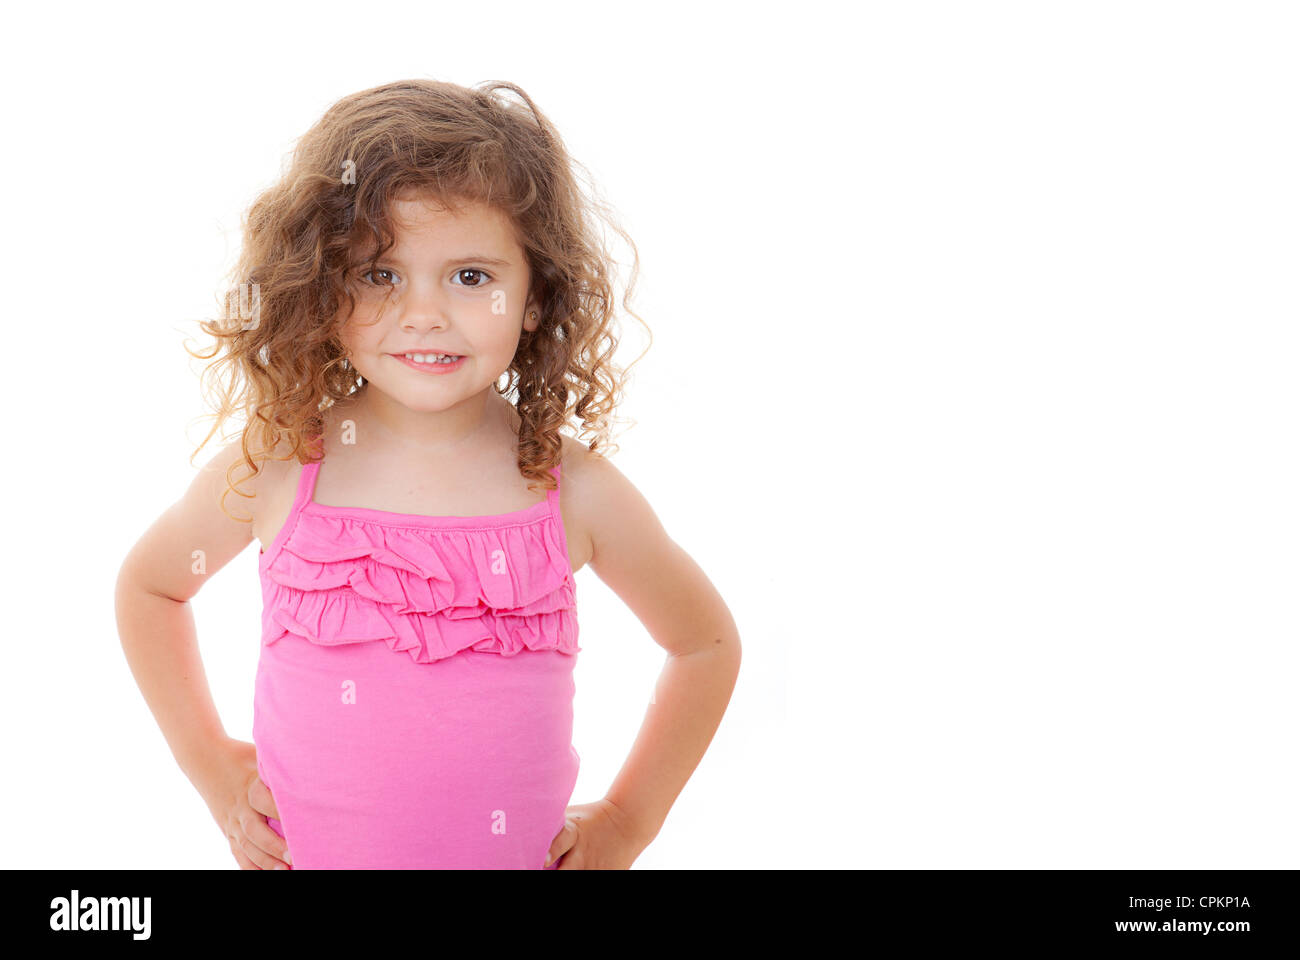 Cute Little Girl Child With Curly Hair Stock Photo 48377542